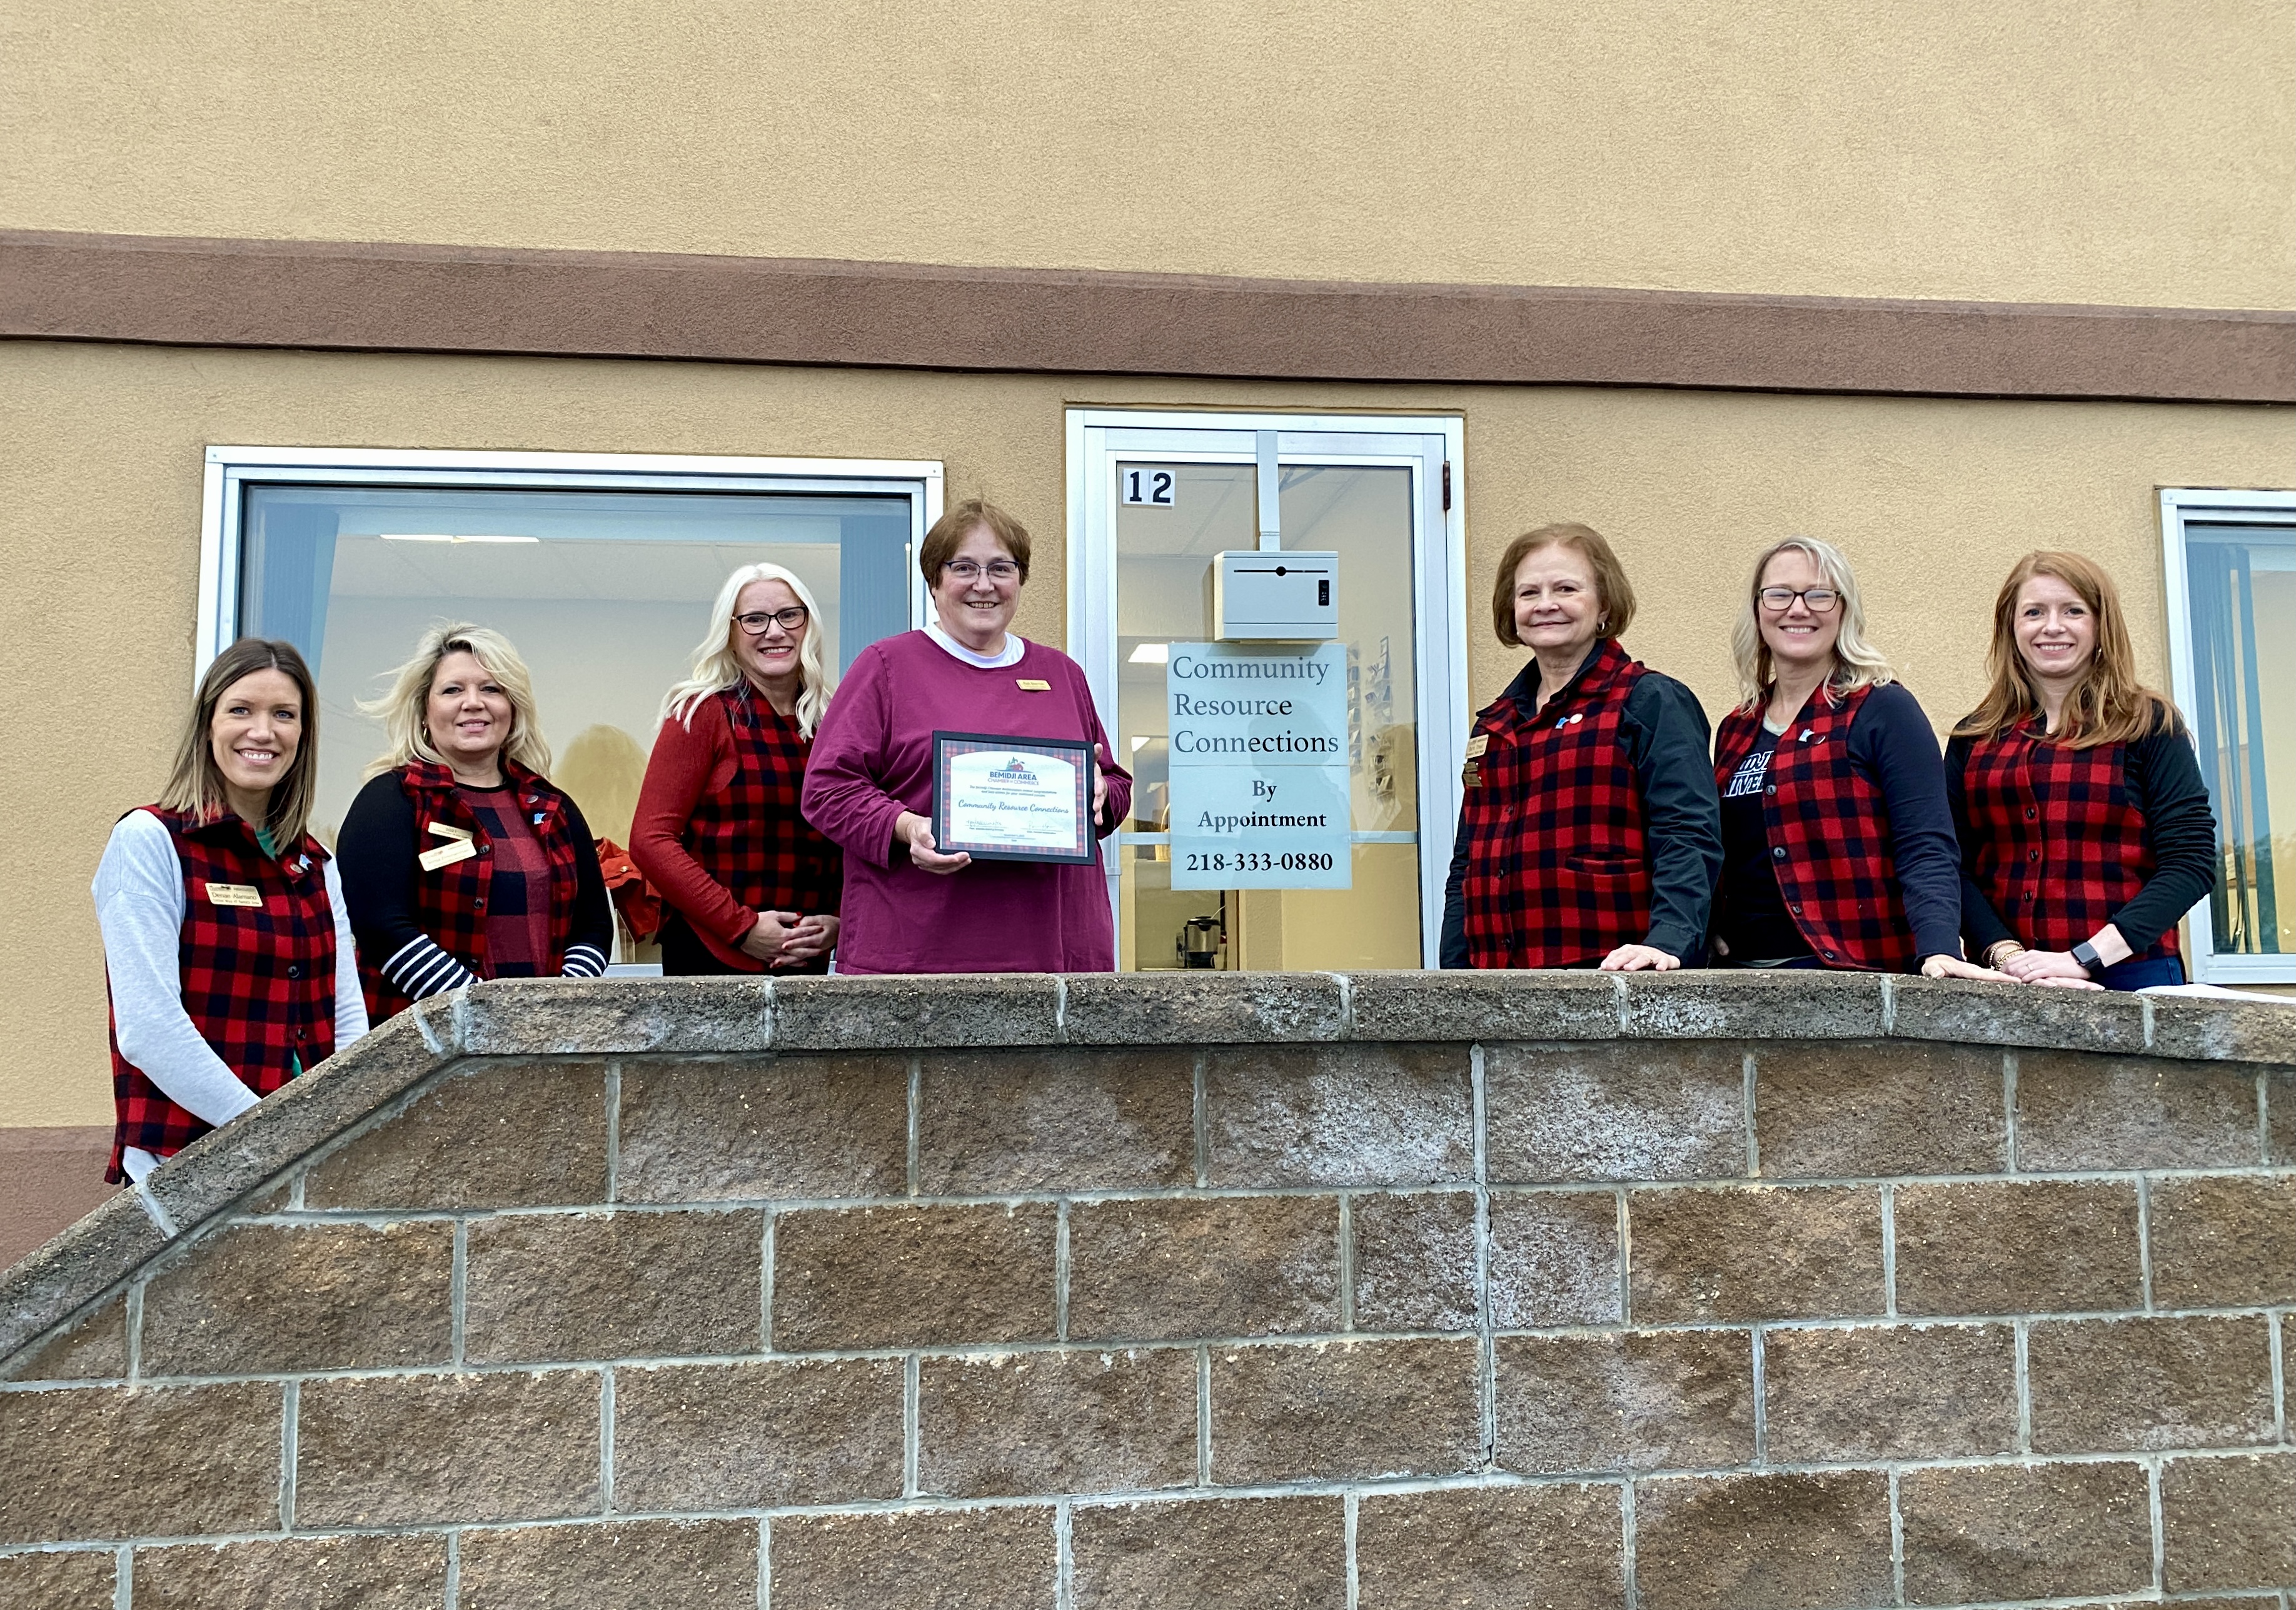 Bemidji Chamber Ambassadors congratulate Executive Director Ruth Sherman on the new location of Community Resource Connections. Photo courtesy of the Bemidji Chamber of Commerce.